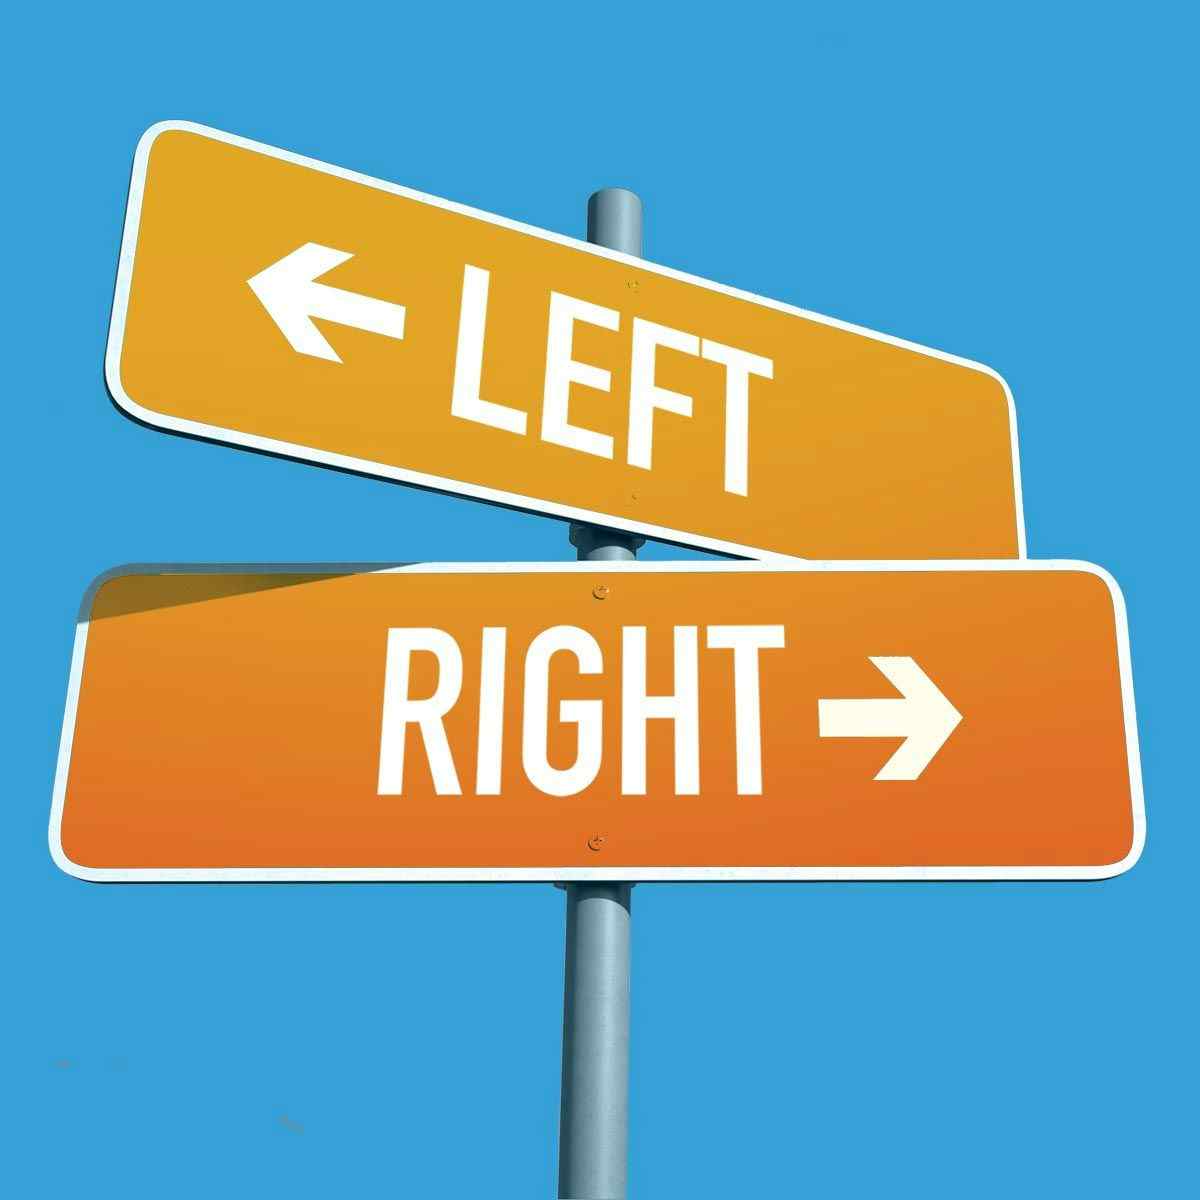 Left and Right Differences